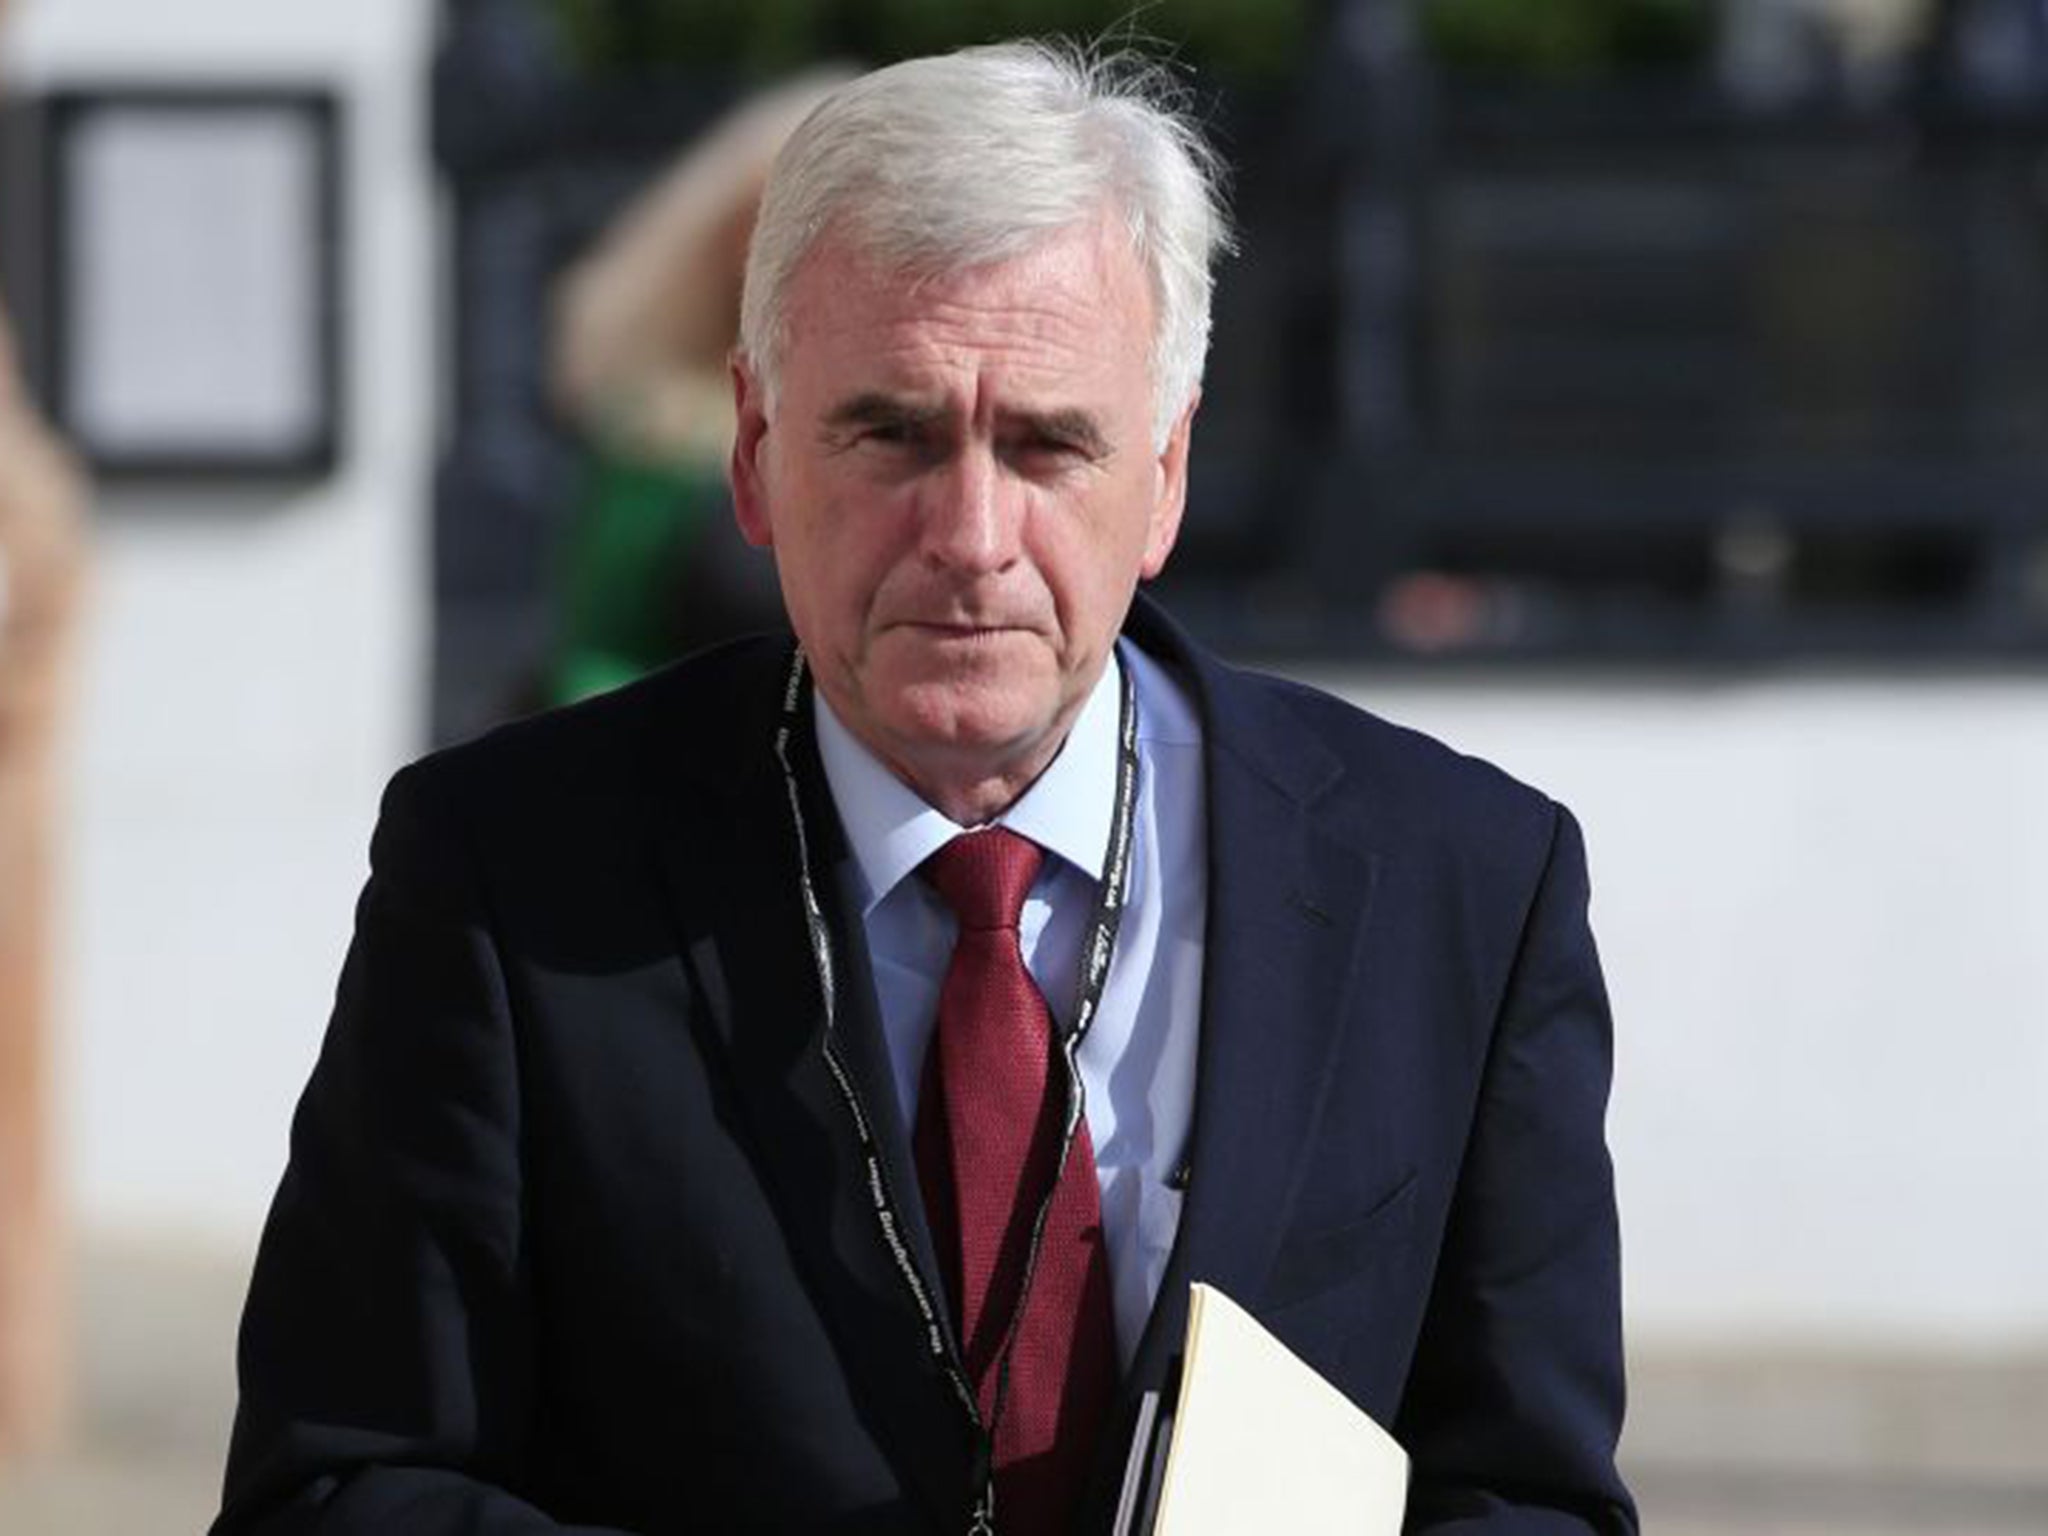 The Labour shadow chancellor knelt before the Queen at his induction to the Privy Council